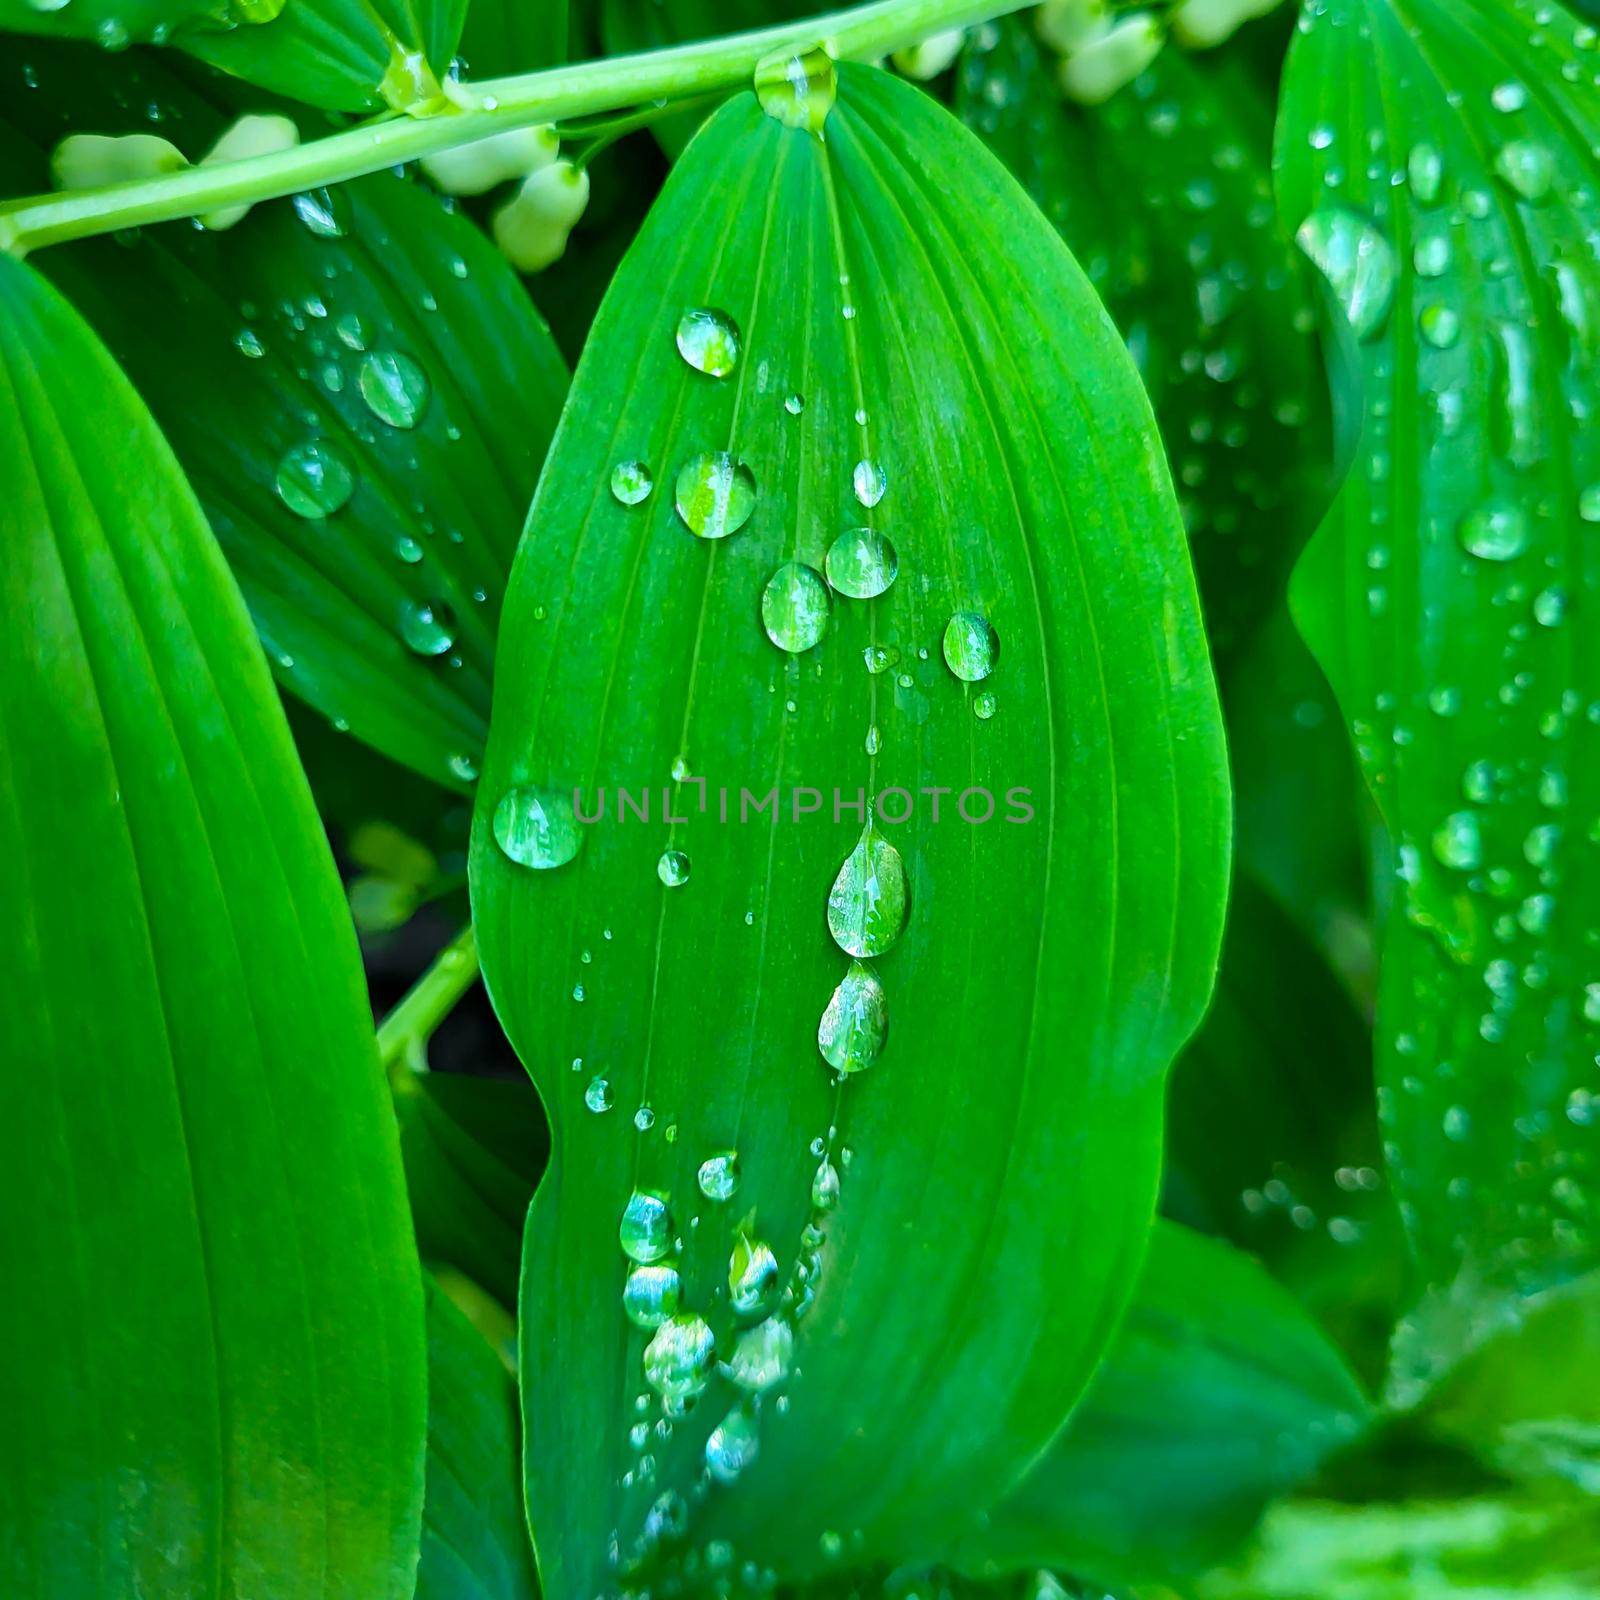 Green leaves with water drops after rain by lapushka62